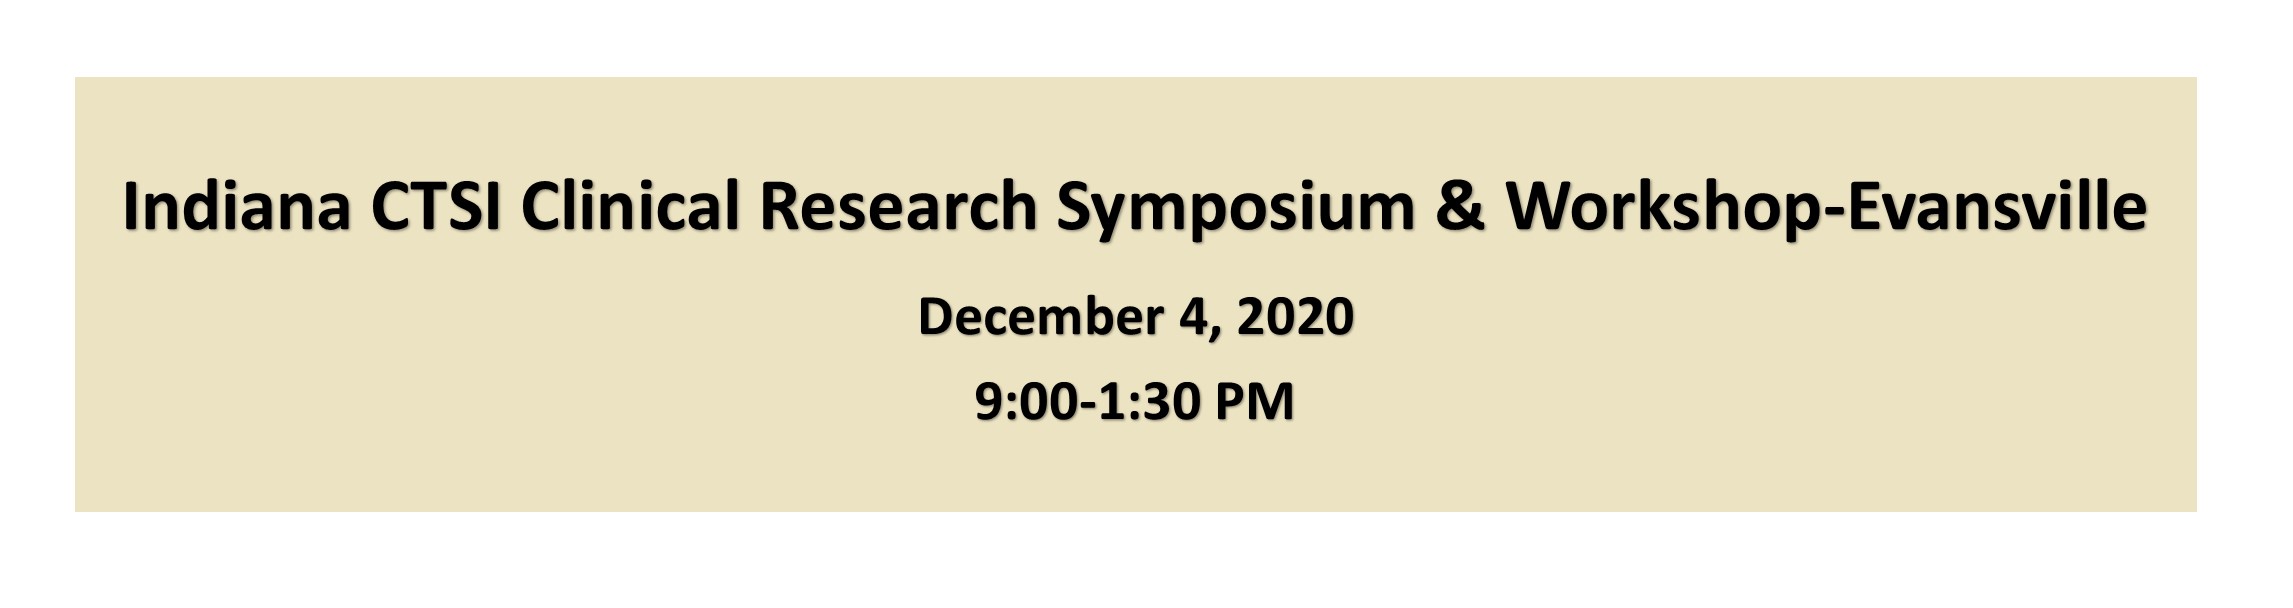 Indiana CTSI Clinical Research Symposium & Workshop - Evansville Banner